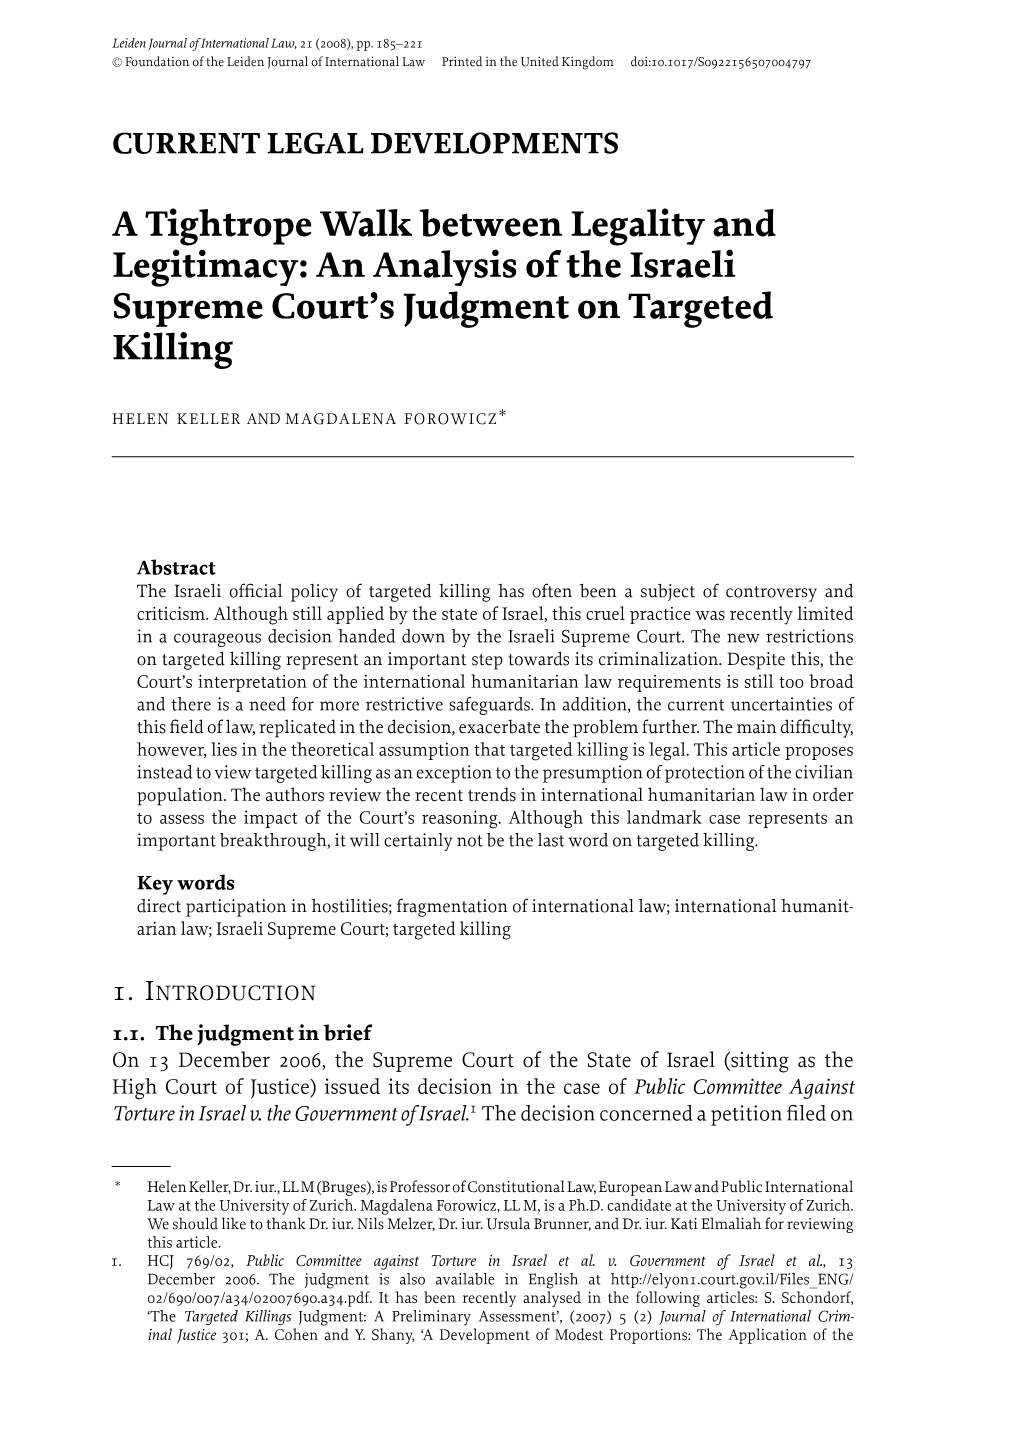 An Analysis of the Israeli Supreme Court's Judgment on Targeted Killing